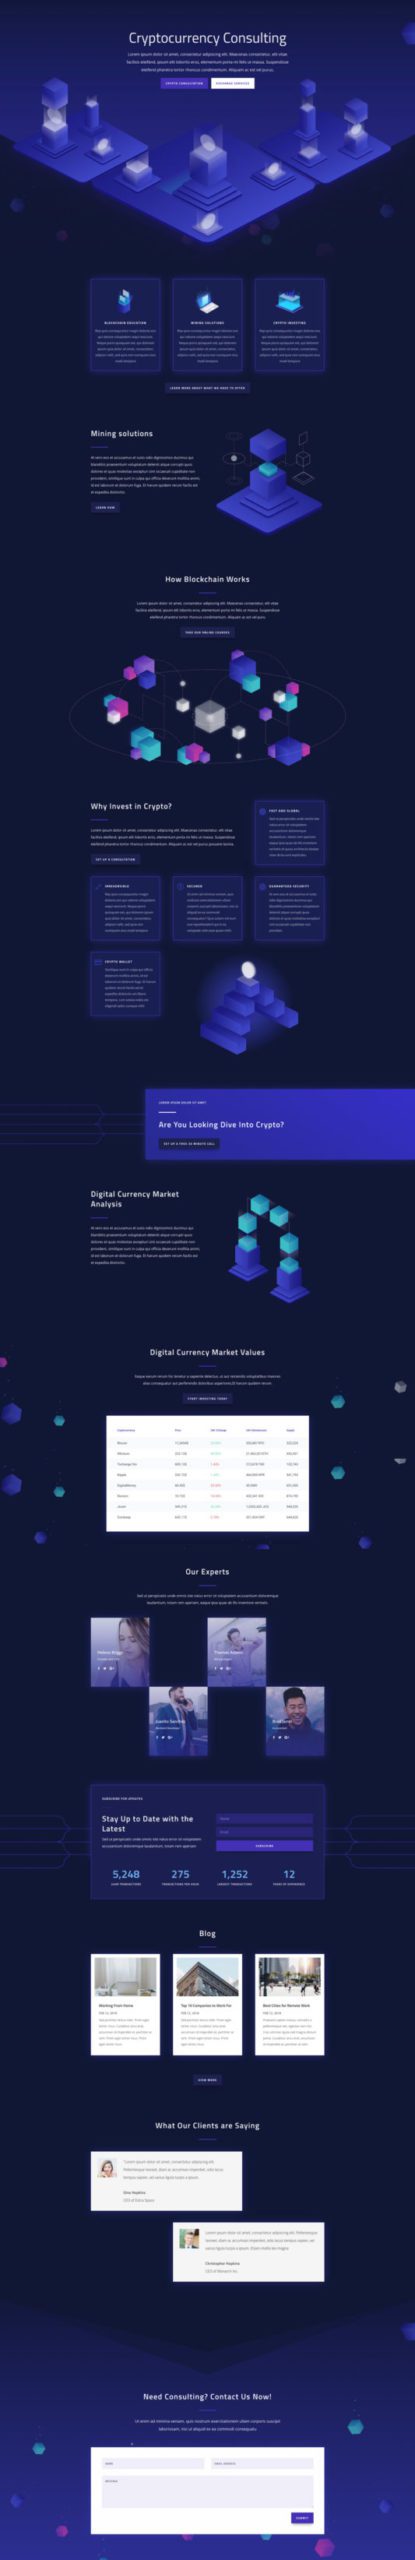 Cryptocurrency Landing Page